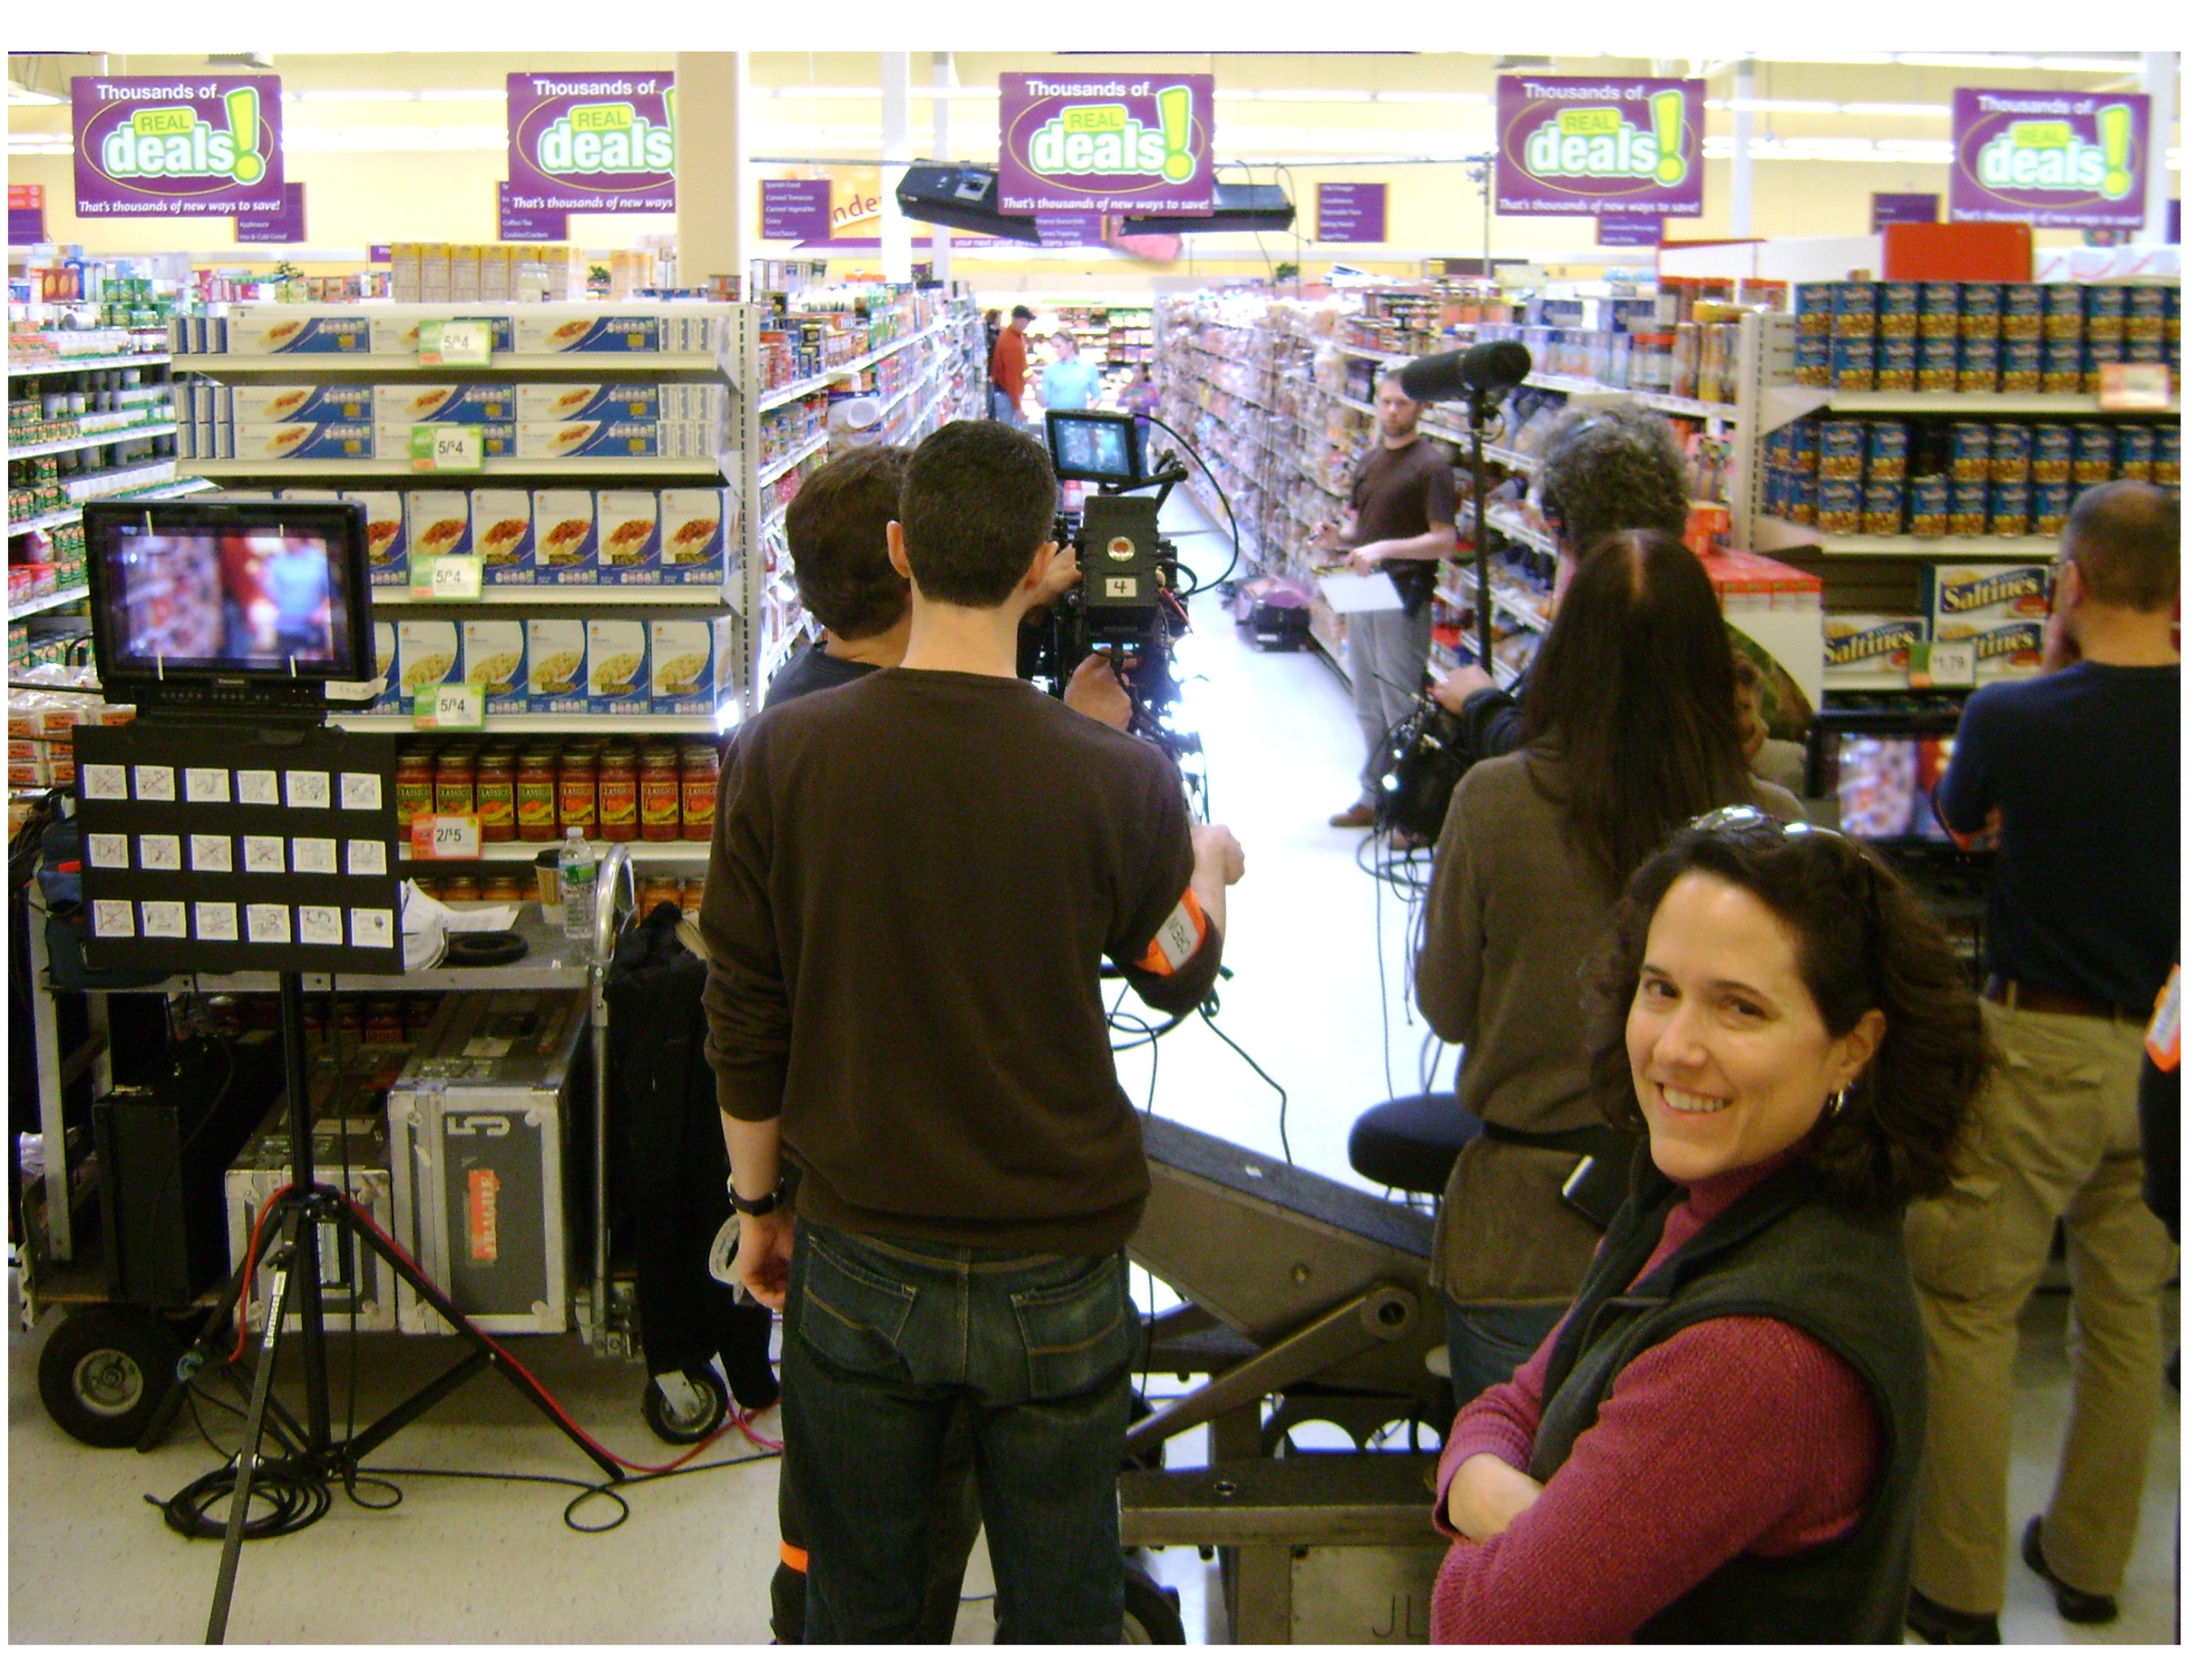 On set- ConAgra Foods 'Child Hunger Ends Here' Shoot with NBC Productions.